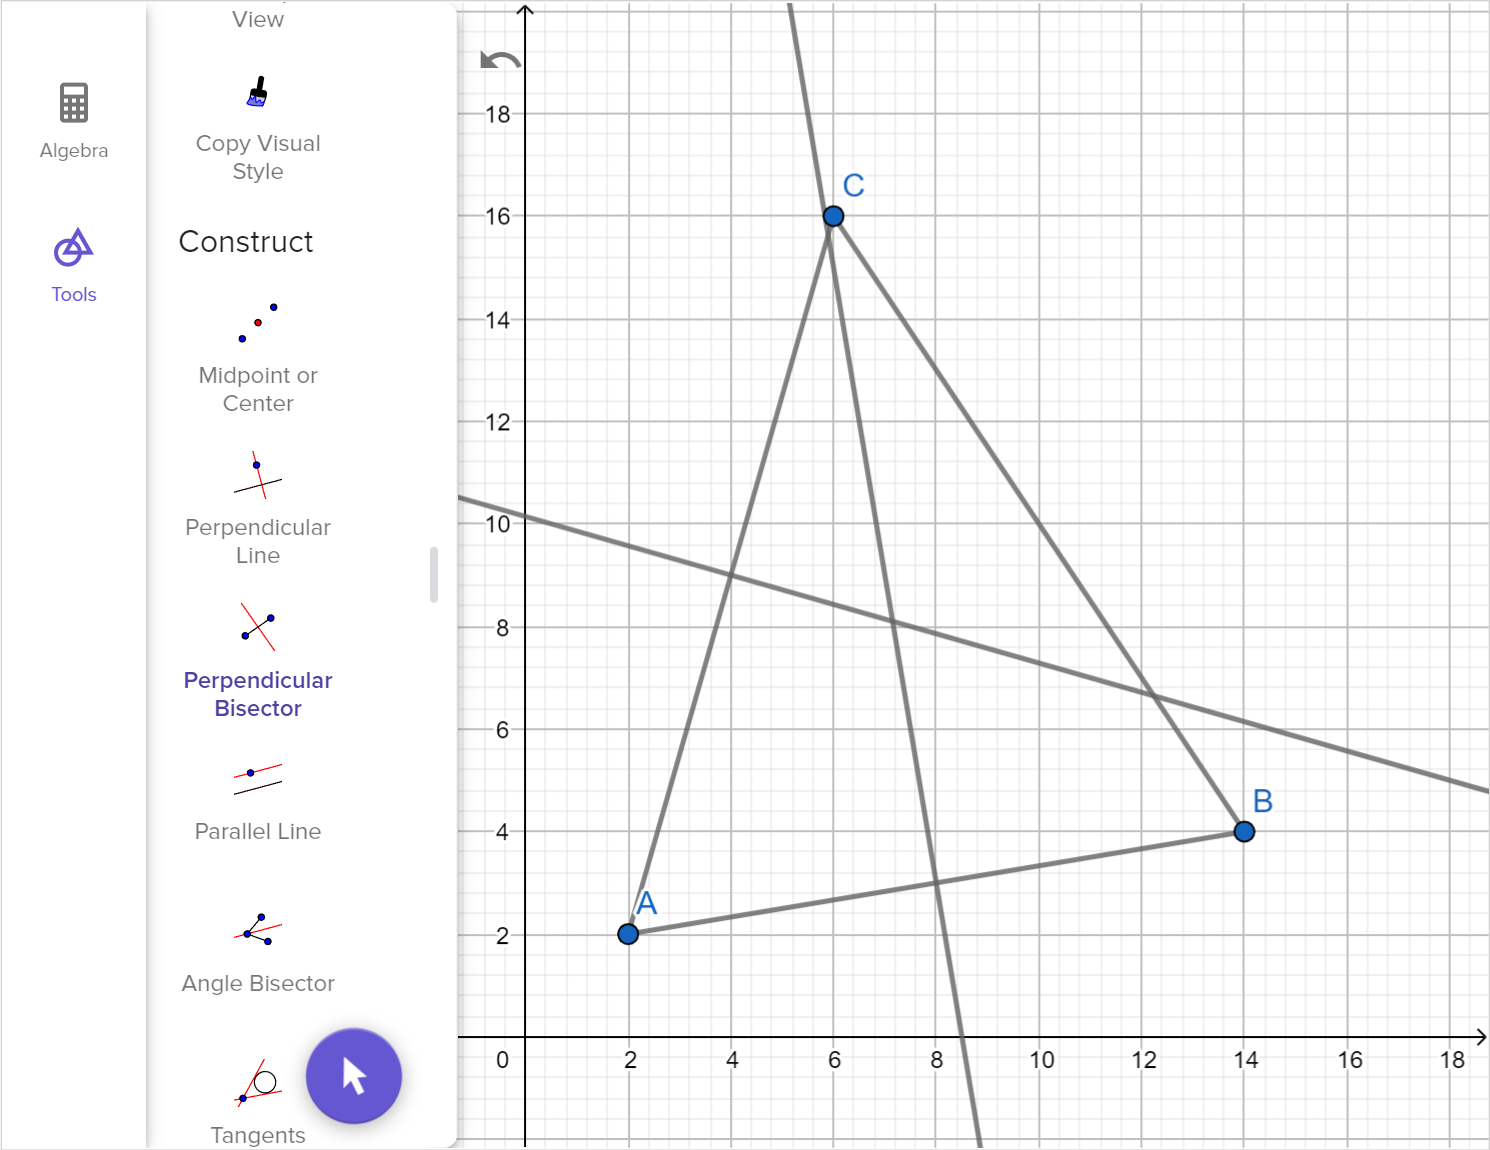 A screenshot of the GeoGebra geometry tool showing how to construct perpendicular bisectors of triangle A B C. Speak to your teacher for more details.